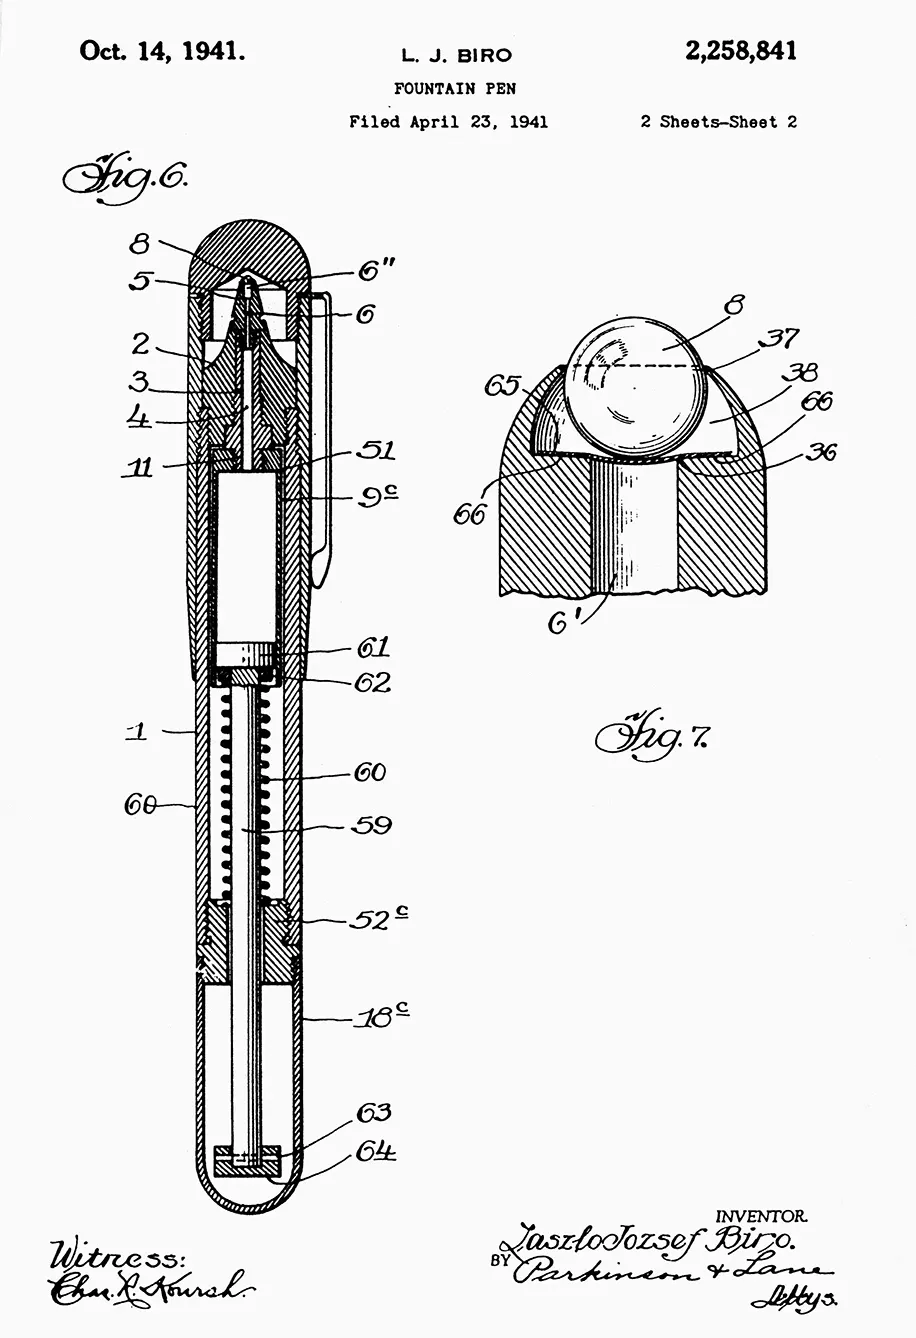 Drawing from the U.S. patent